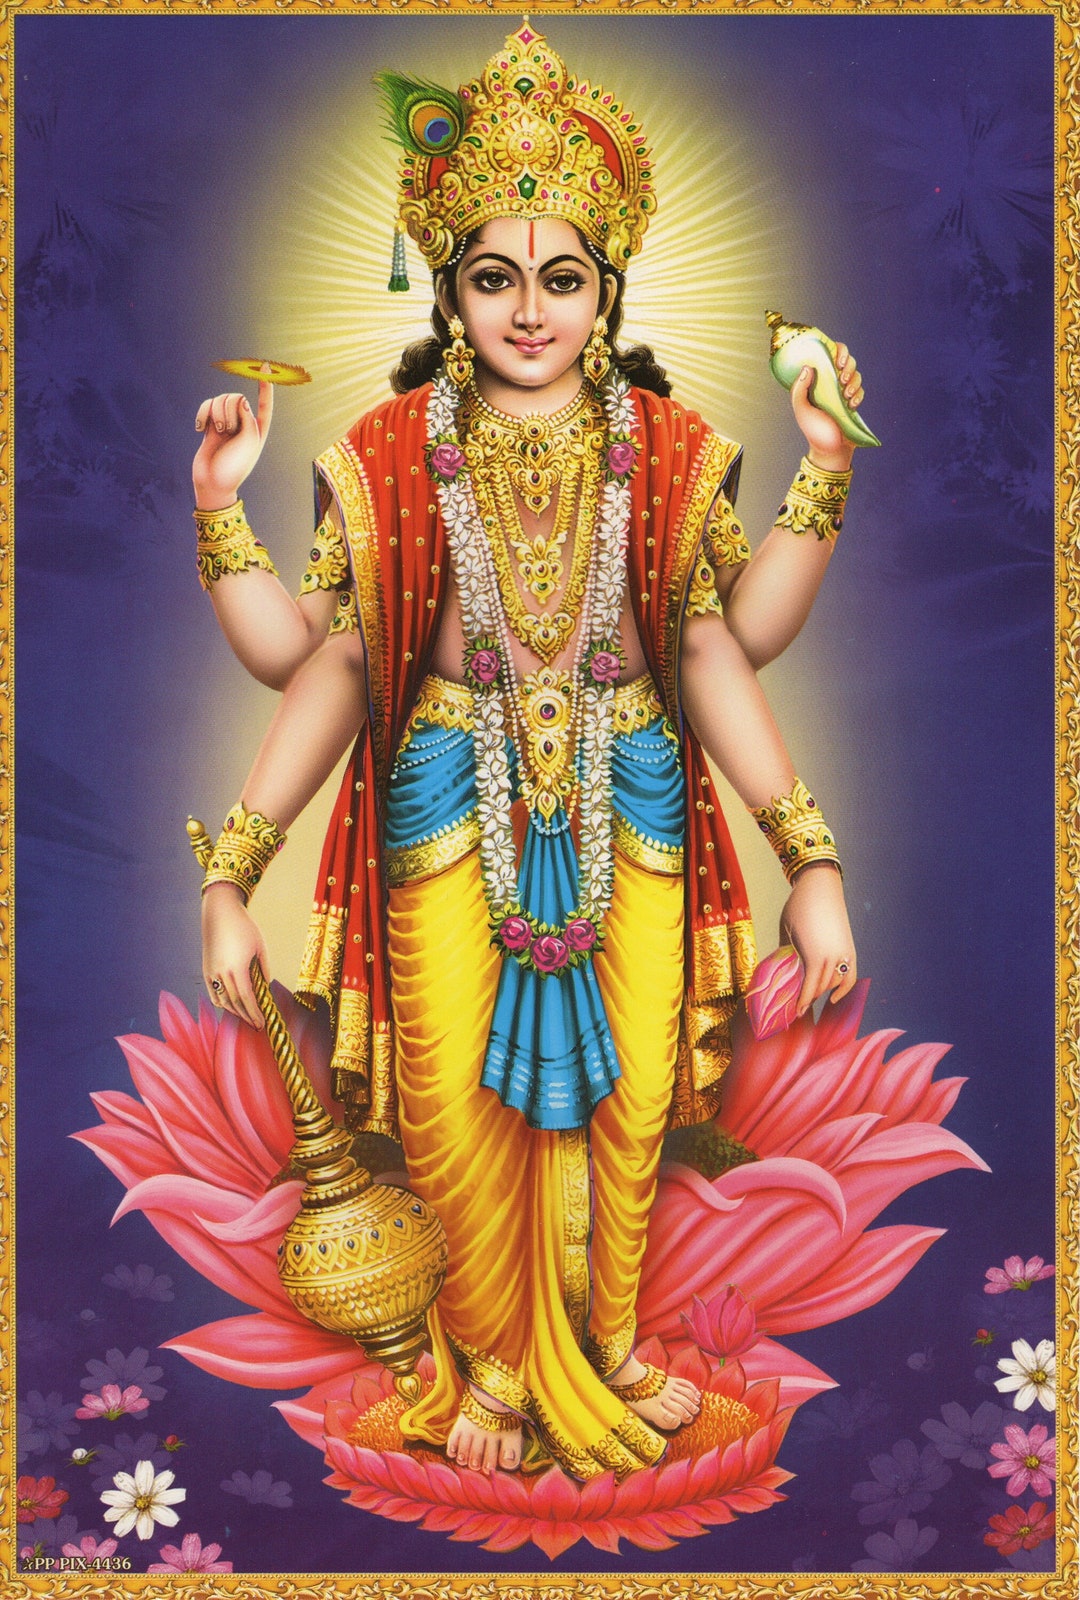 Incredible Collection of 999+ HD Lord Vishnu Images - Full 4K Quality